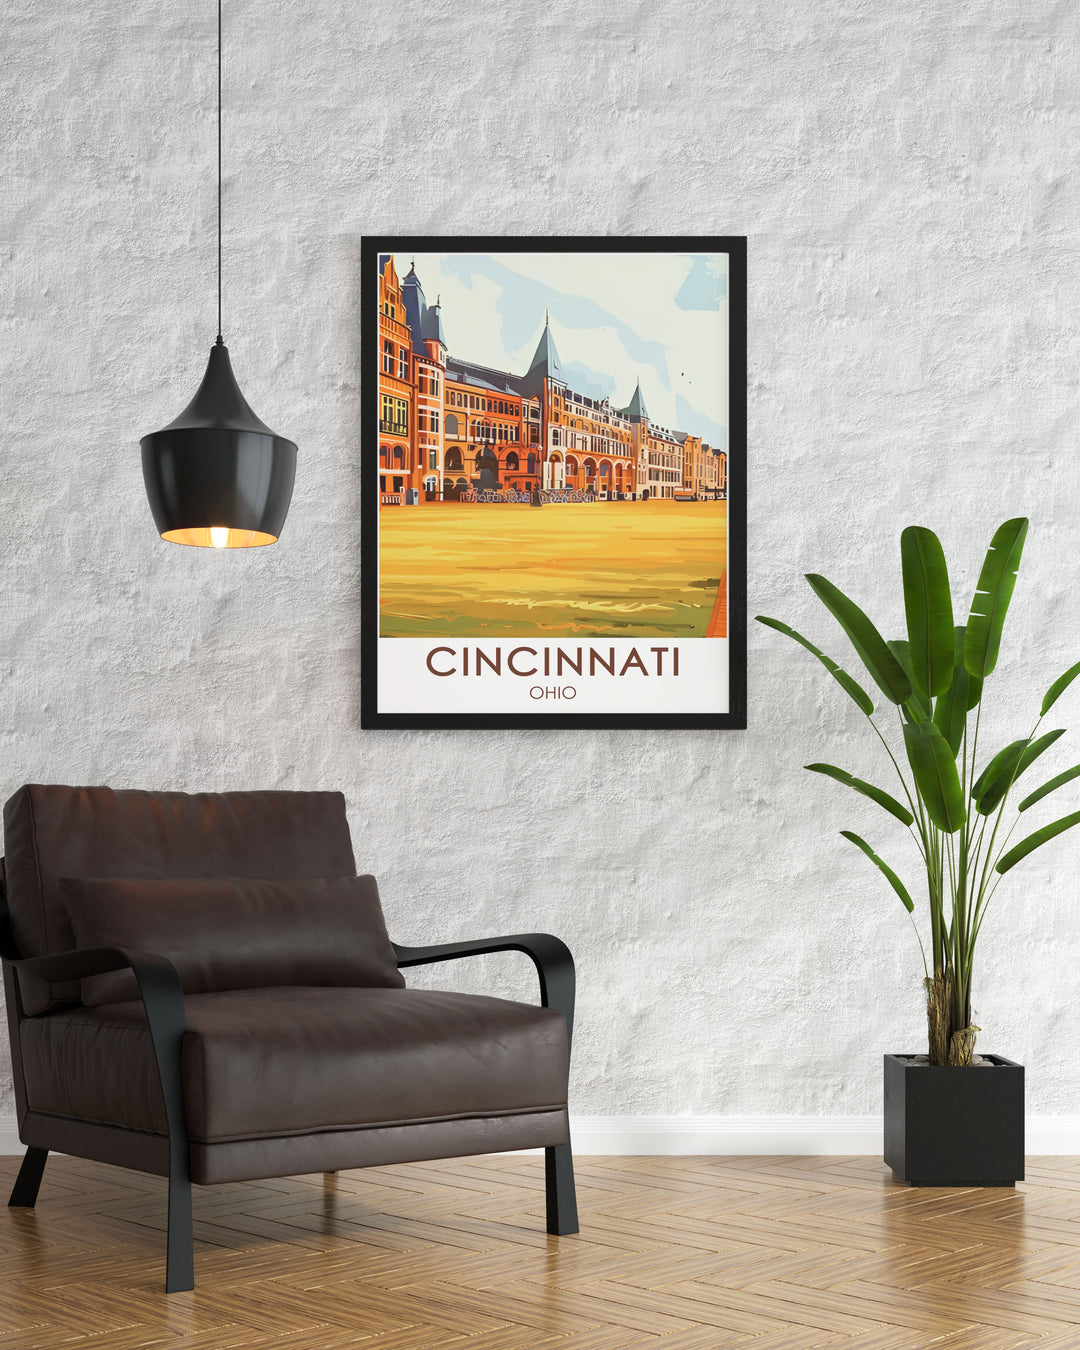 A detailed art print of Cincinnatis Music Hall showcases its Gothic architectural splendor. Perfect for any space, this poster celebrates the citys rich artistic heritage.